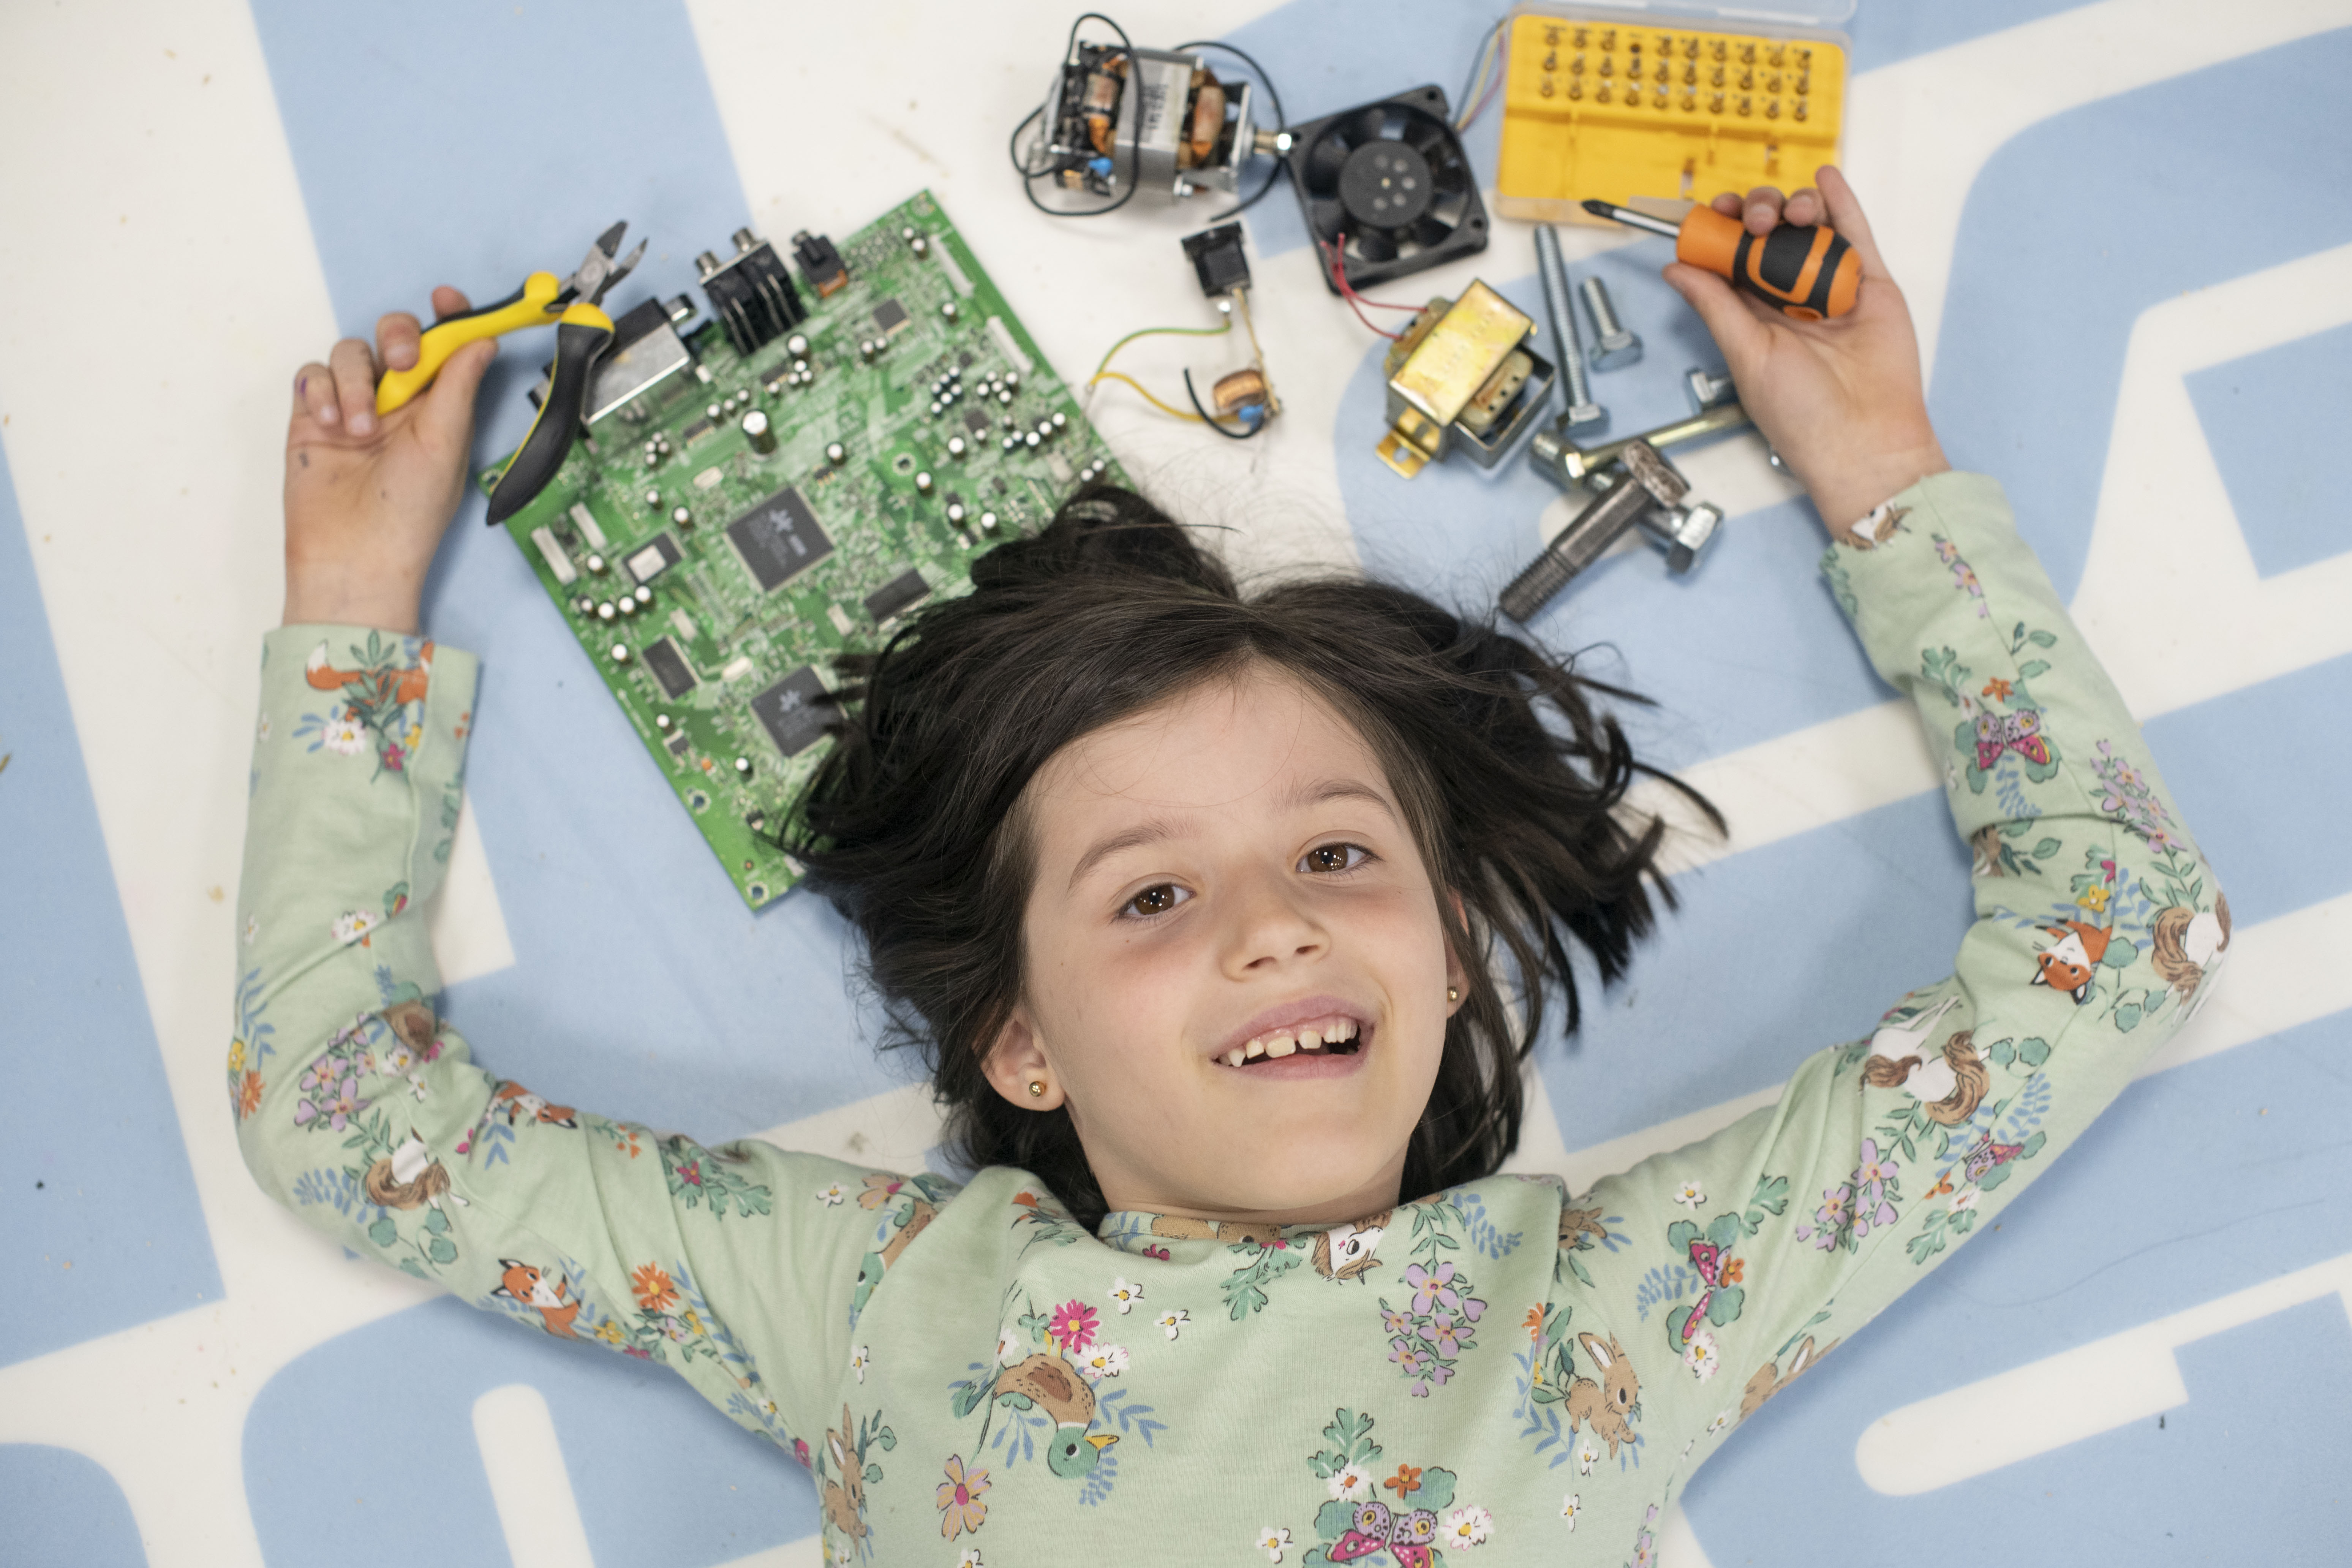 A girl lies on the floor surrounded by tools and electronic parts